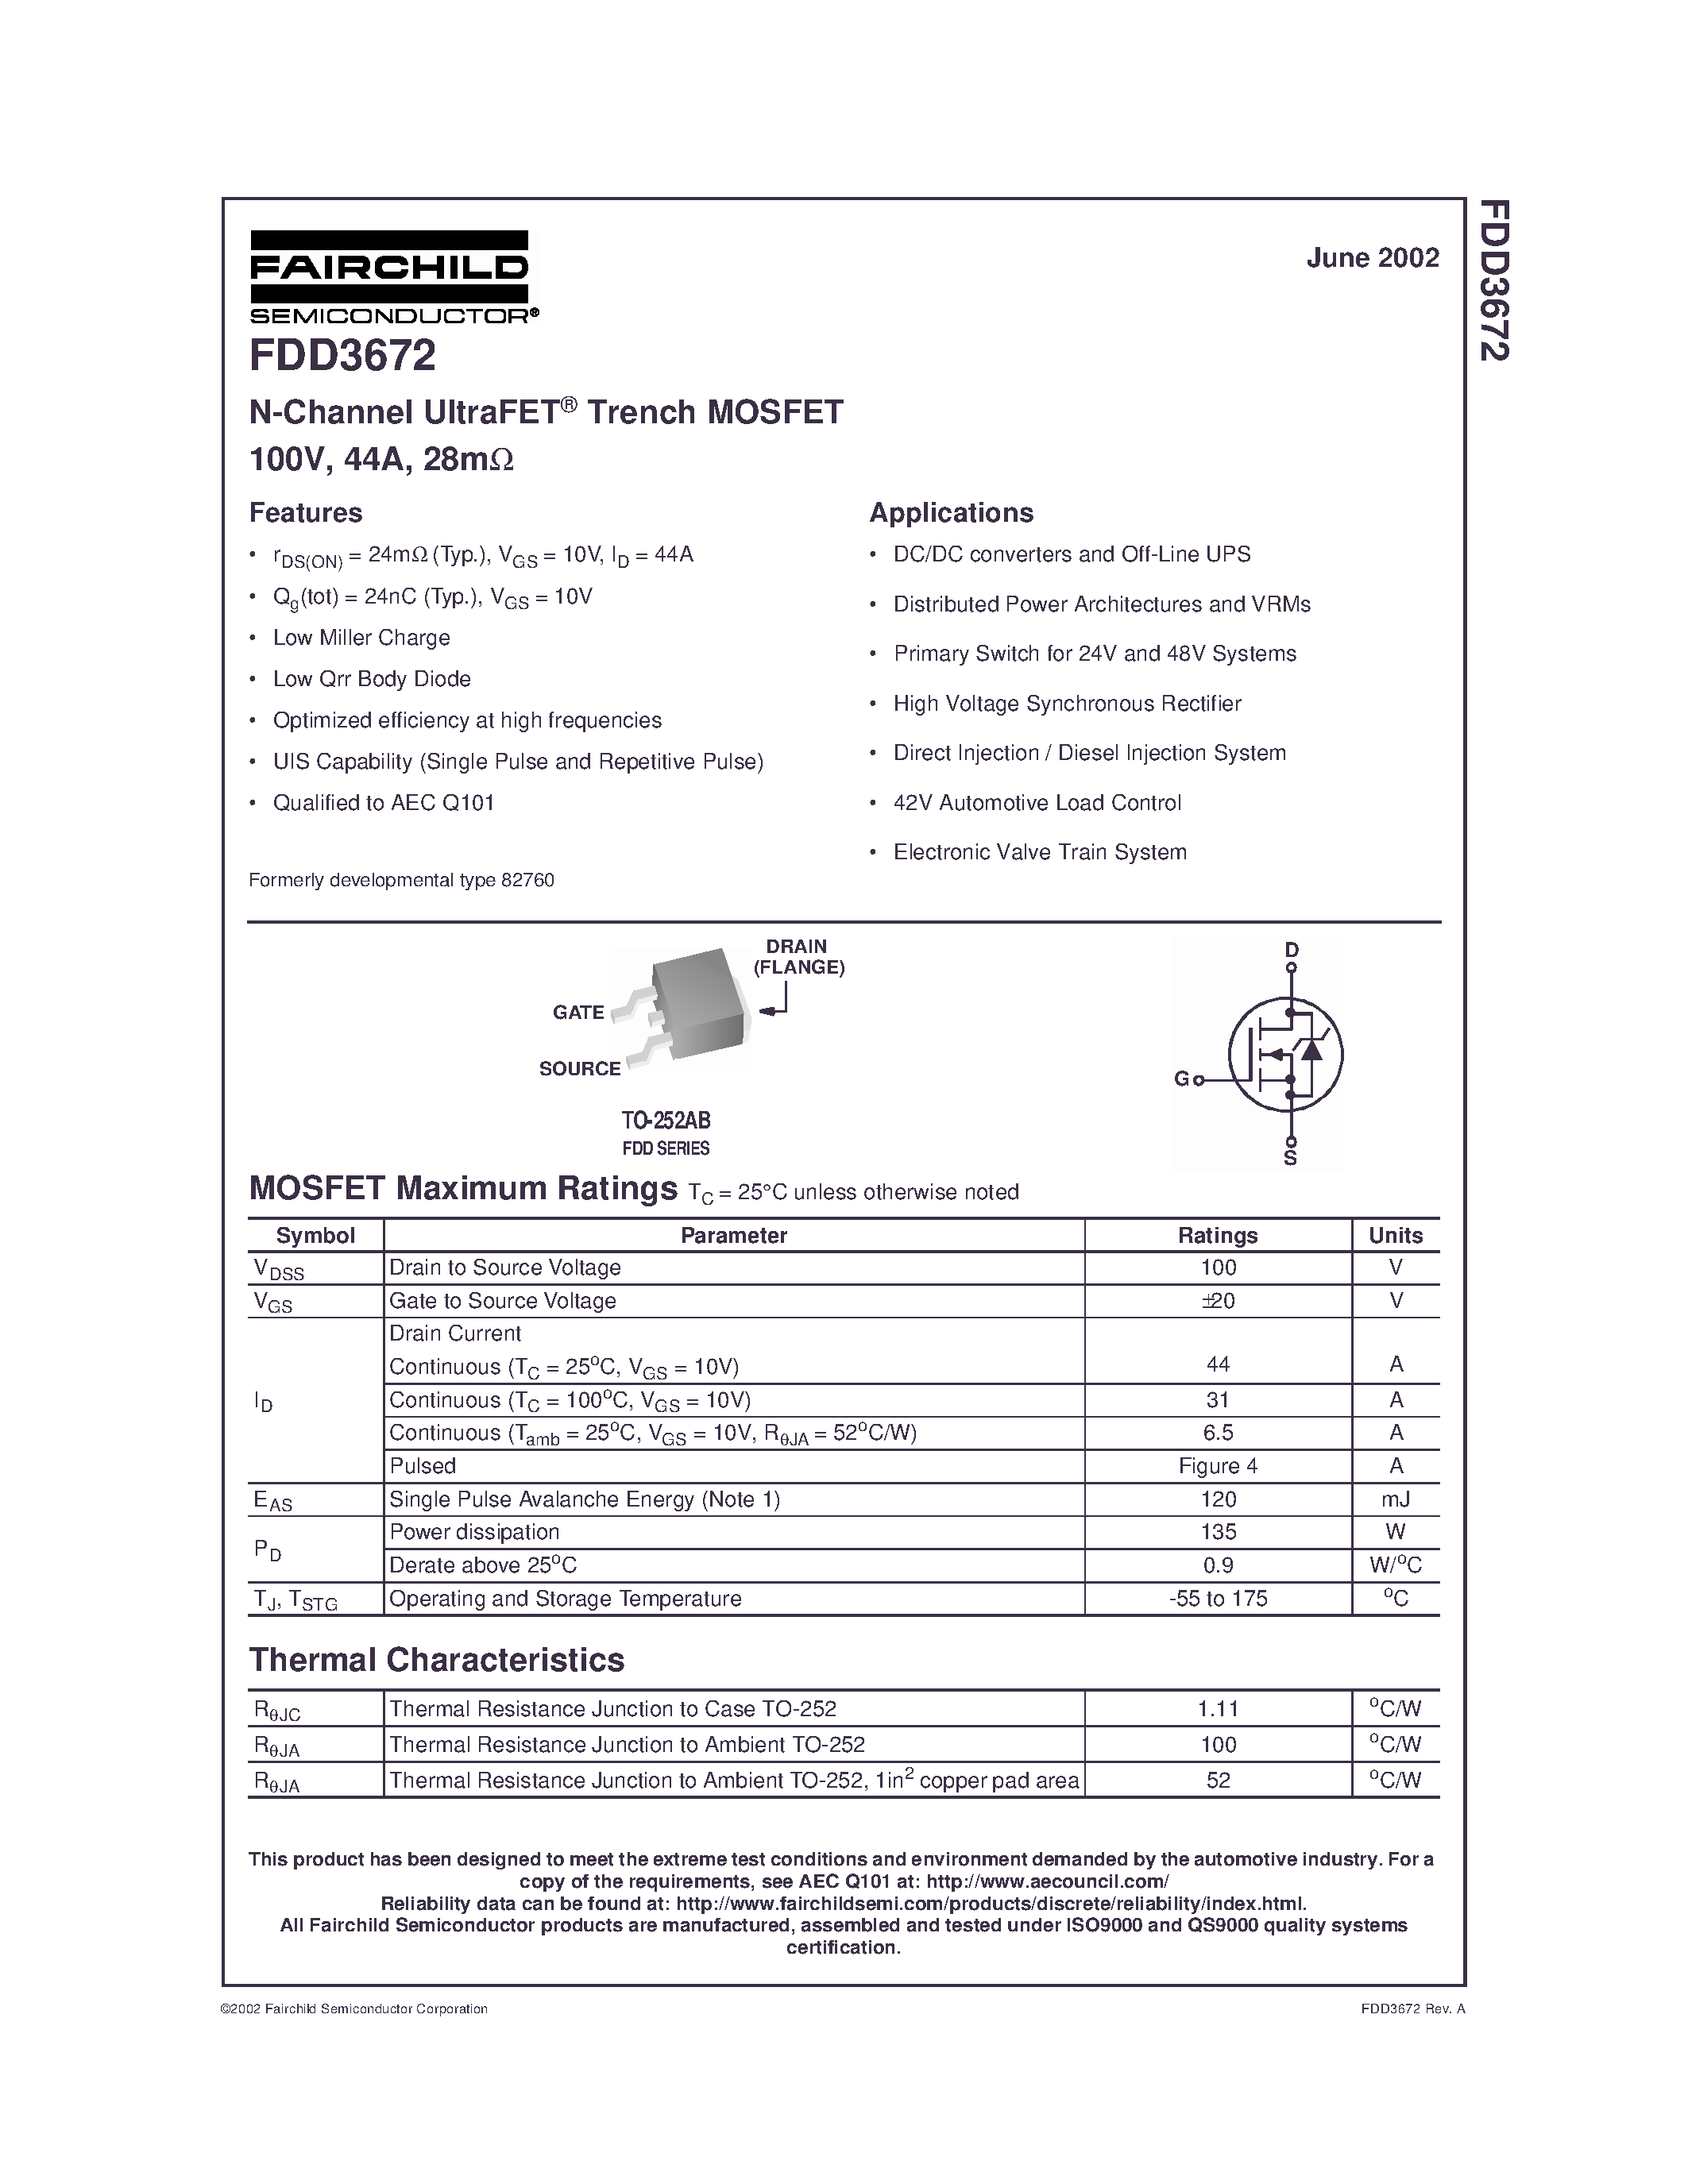 Даташит FDD3672 - N-Channel UltraFET Trench MOSFET 100V/ 44A/ 28m страница 1